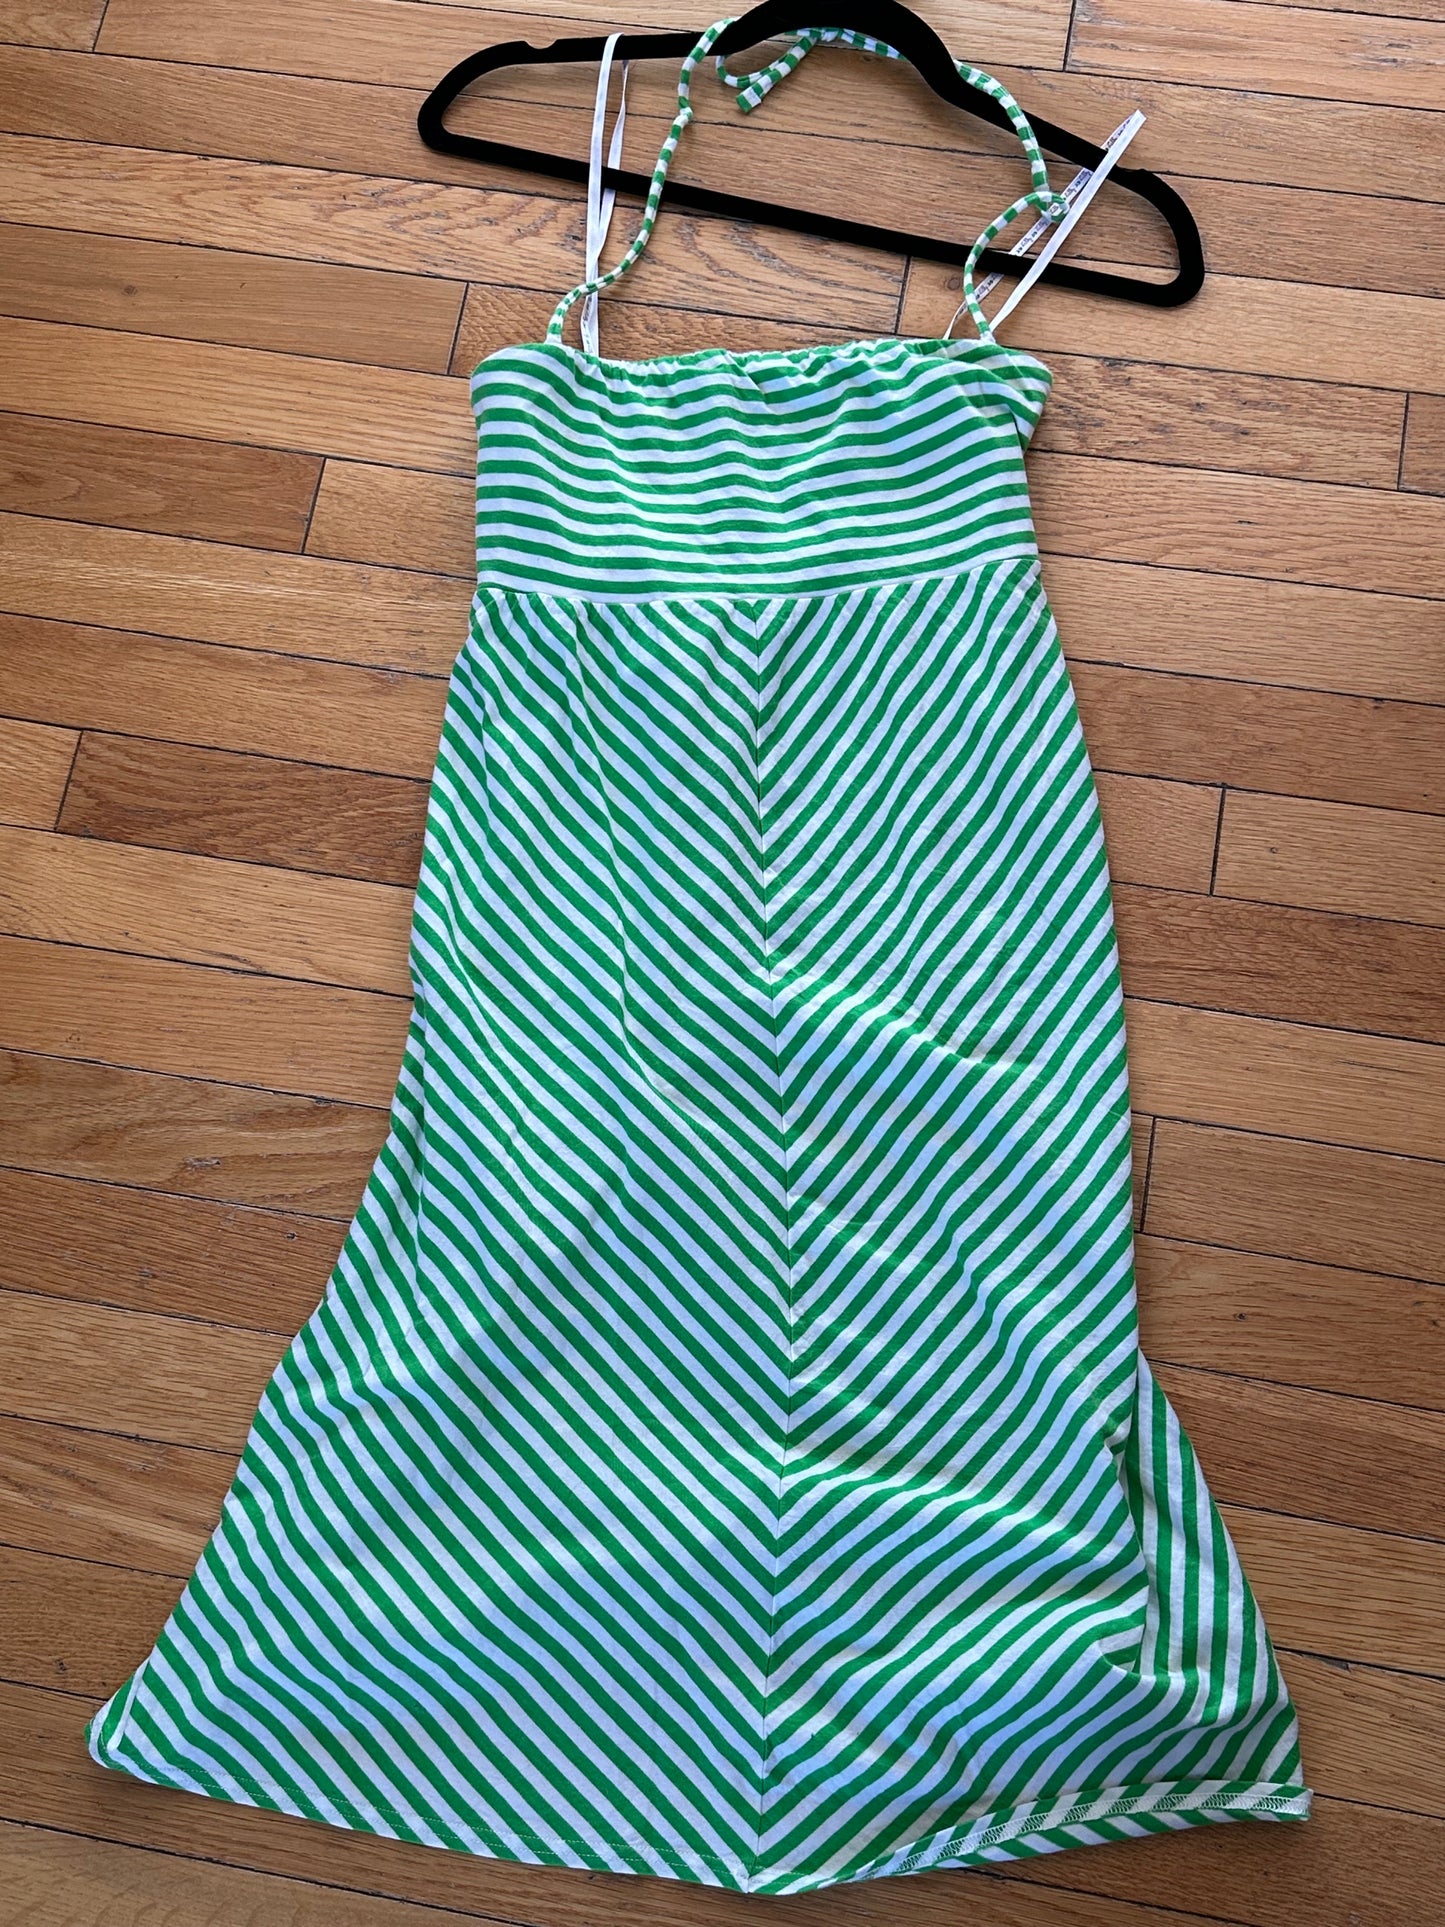 Lilly Pulitzer Sz Small White Green Striped Dress